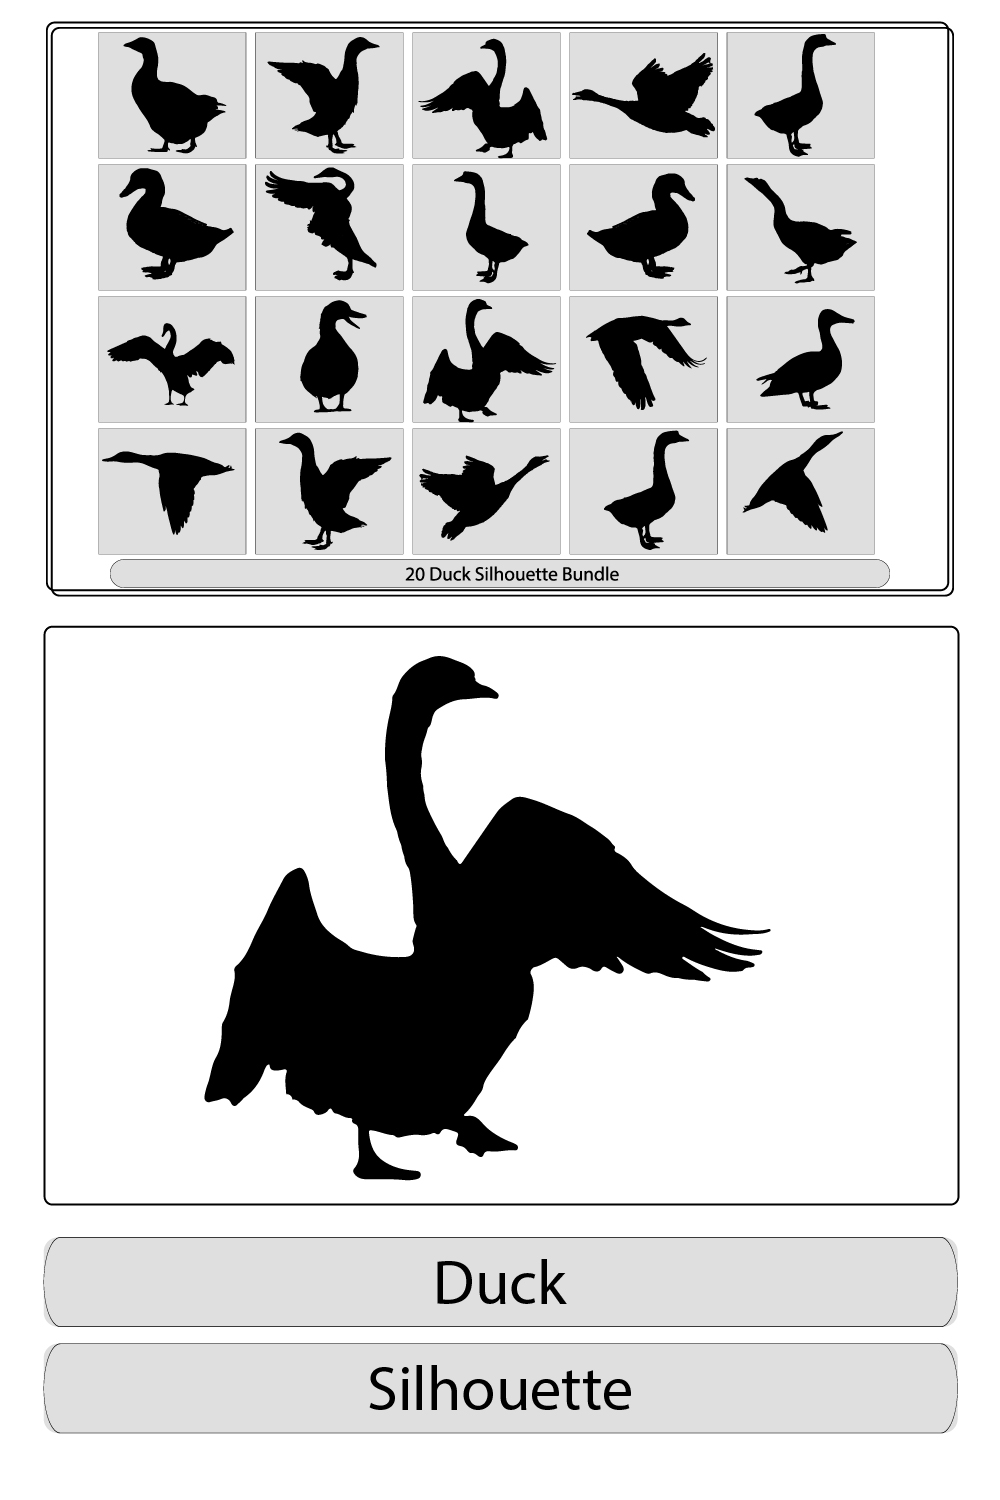 Silhouettes of wild and domestic duck, Duck in flight,silhouette of goose, duck, set,Real duck silhouette pinterest preview image.